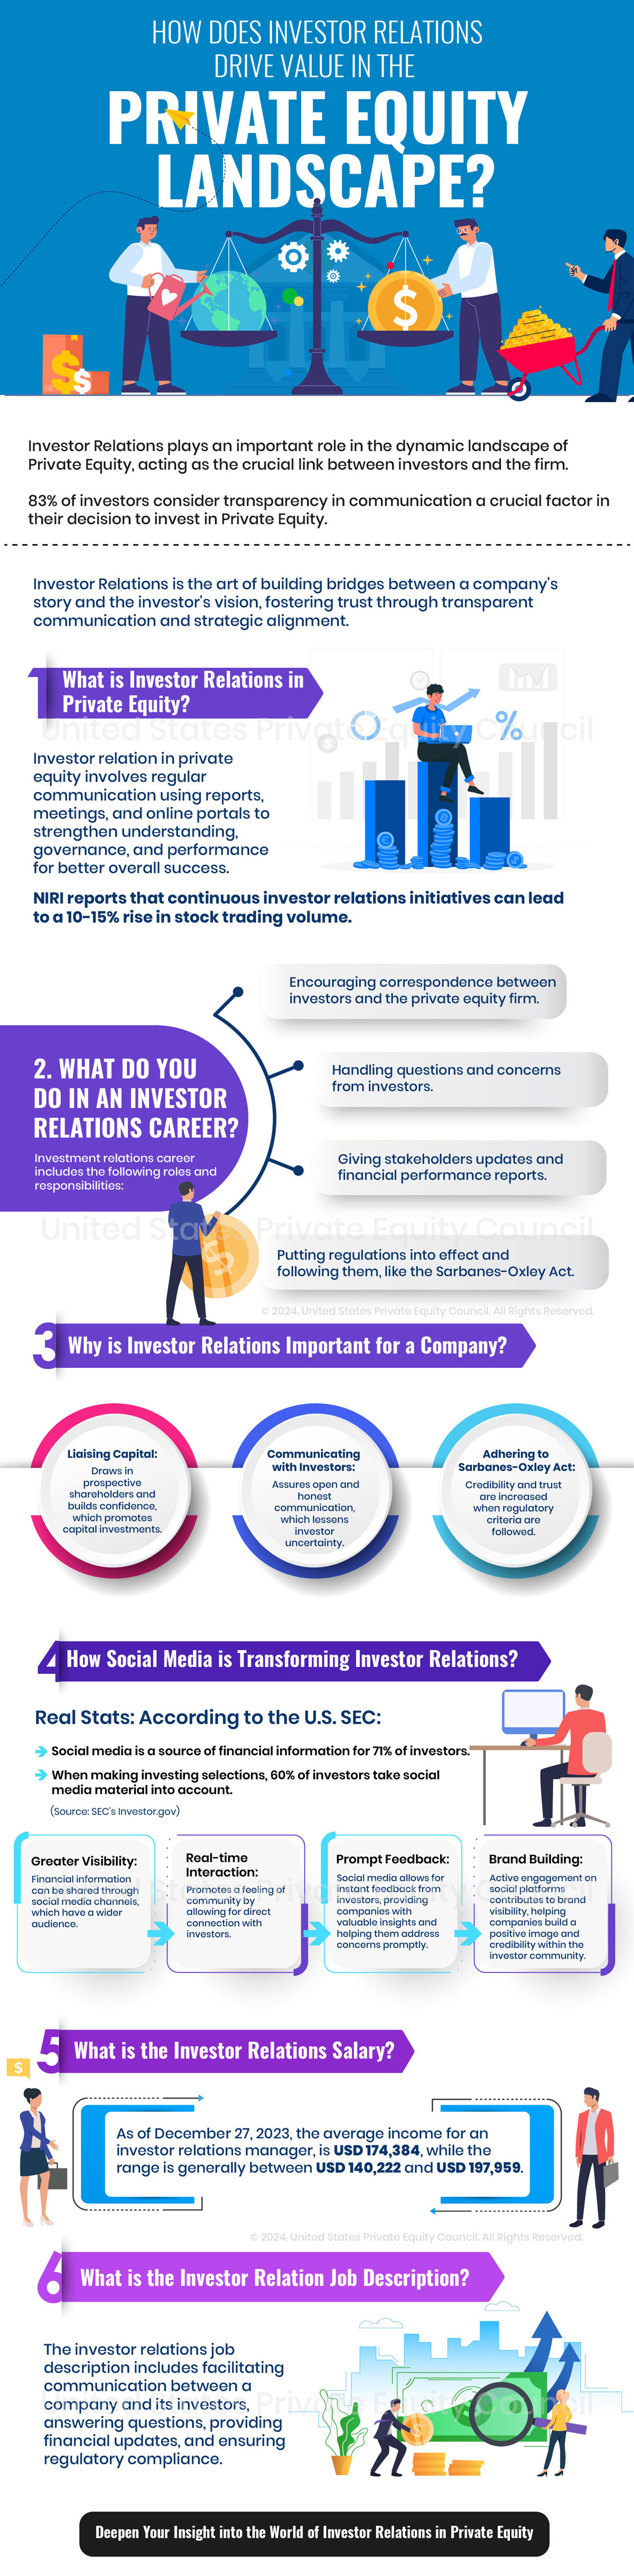 How Does Investor Relations Drive Value in the Private Equity Landscape?